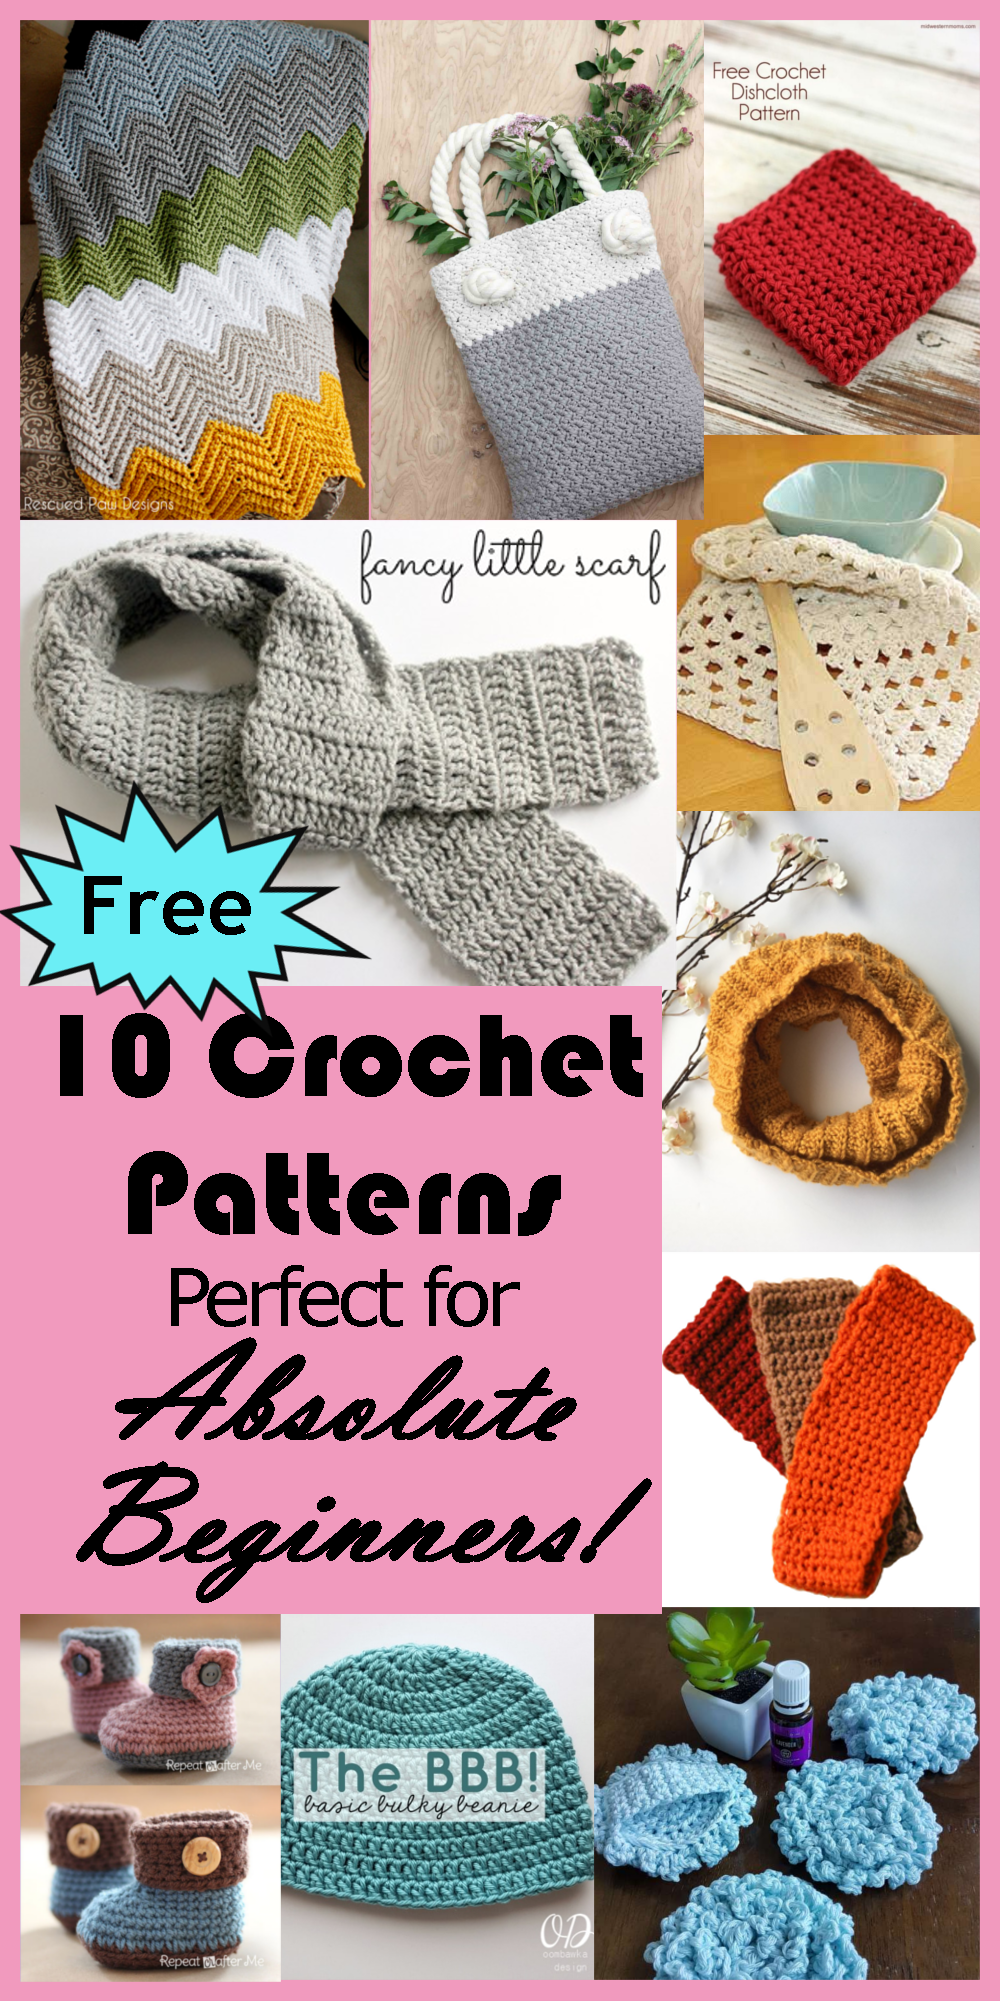 10 perfect crochet patterns for the absolute beginner! This round up from Caitlin's Contagious Creations has ten totally free projects for the absolute beginner. Start one today!